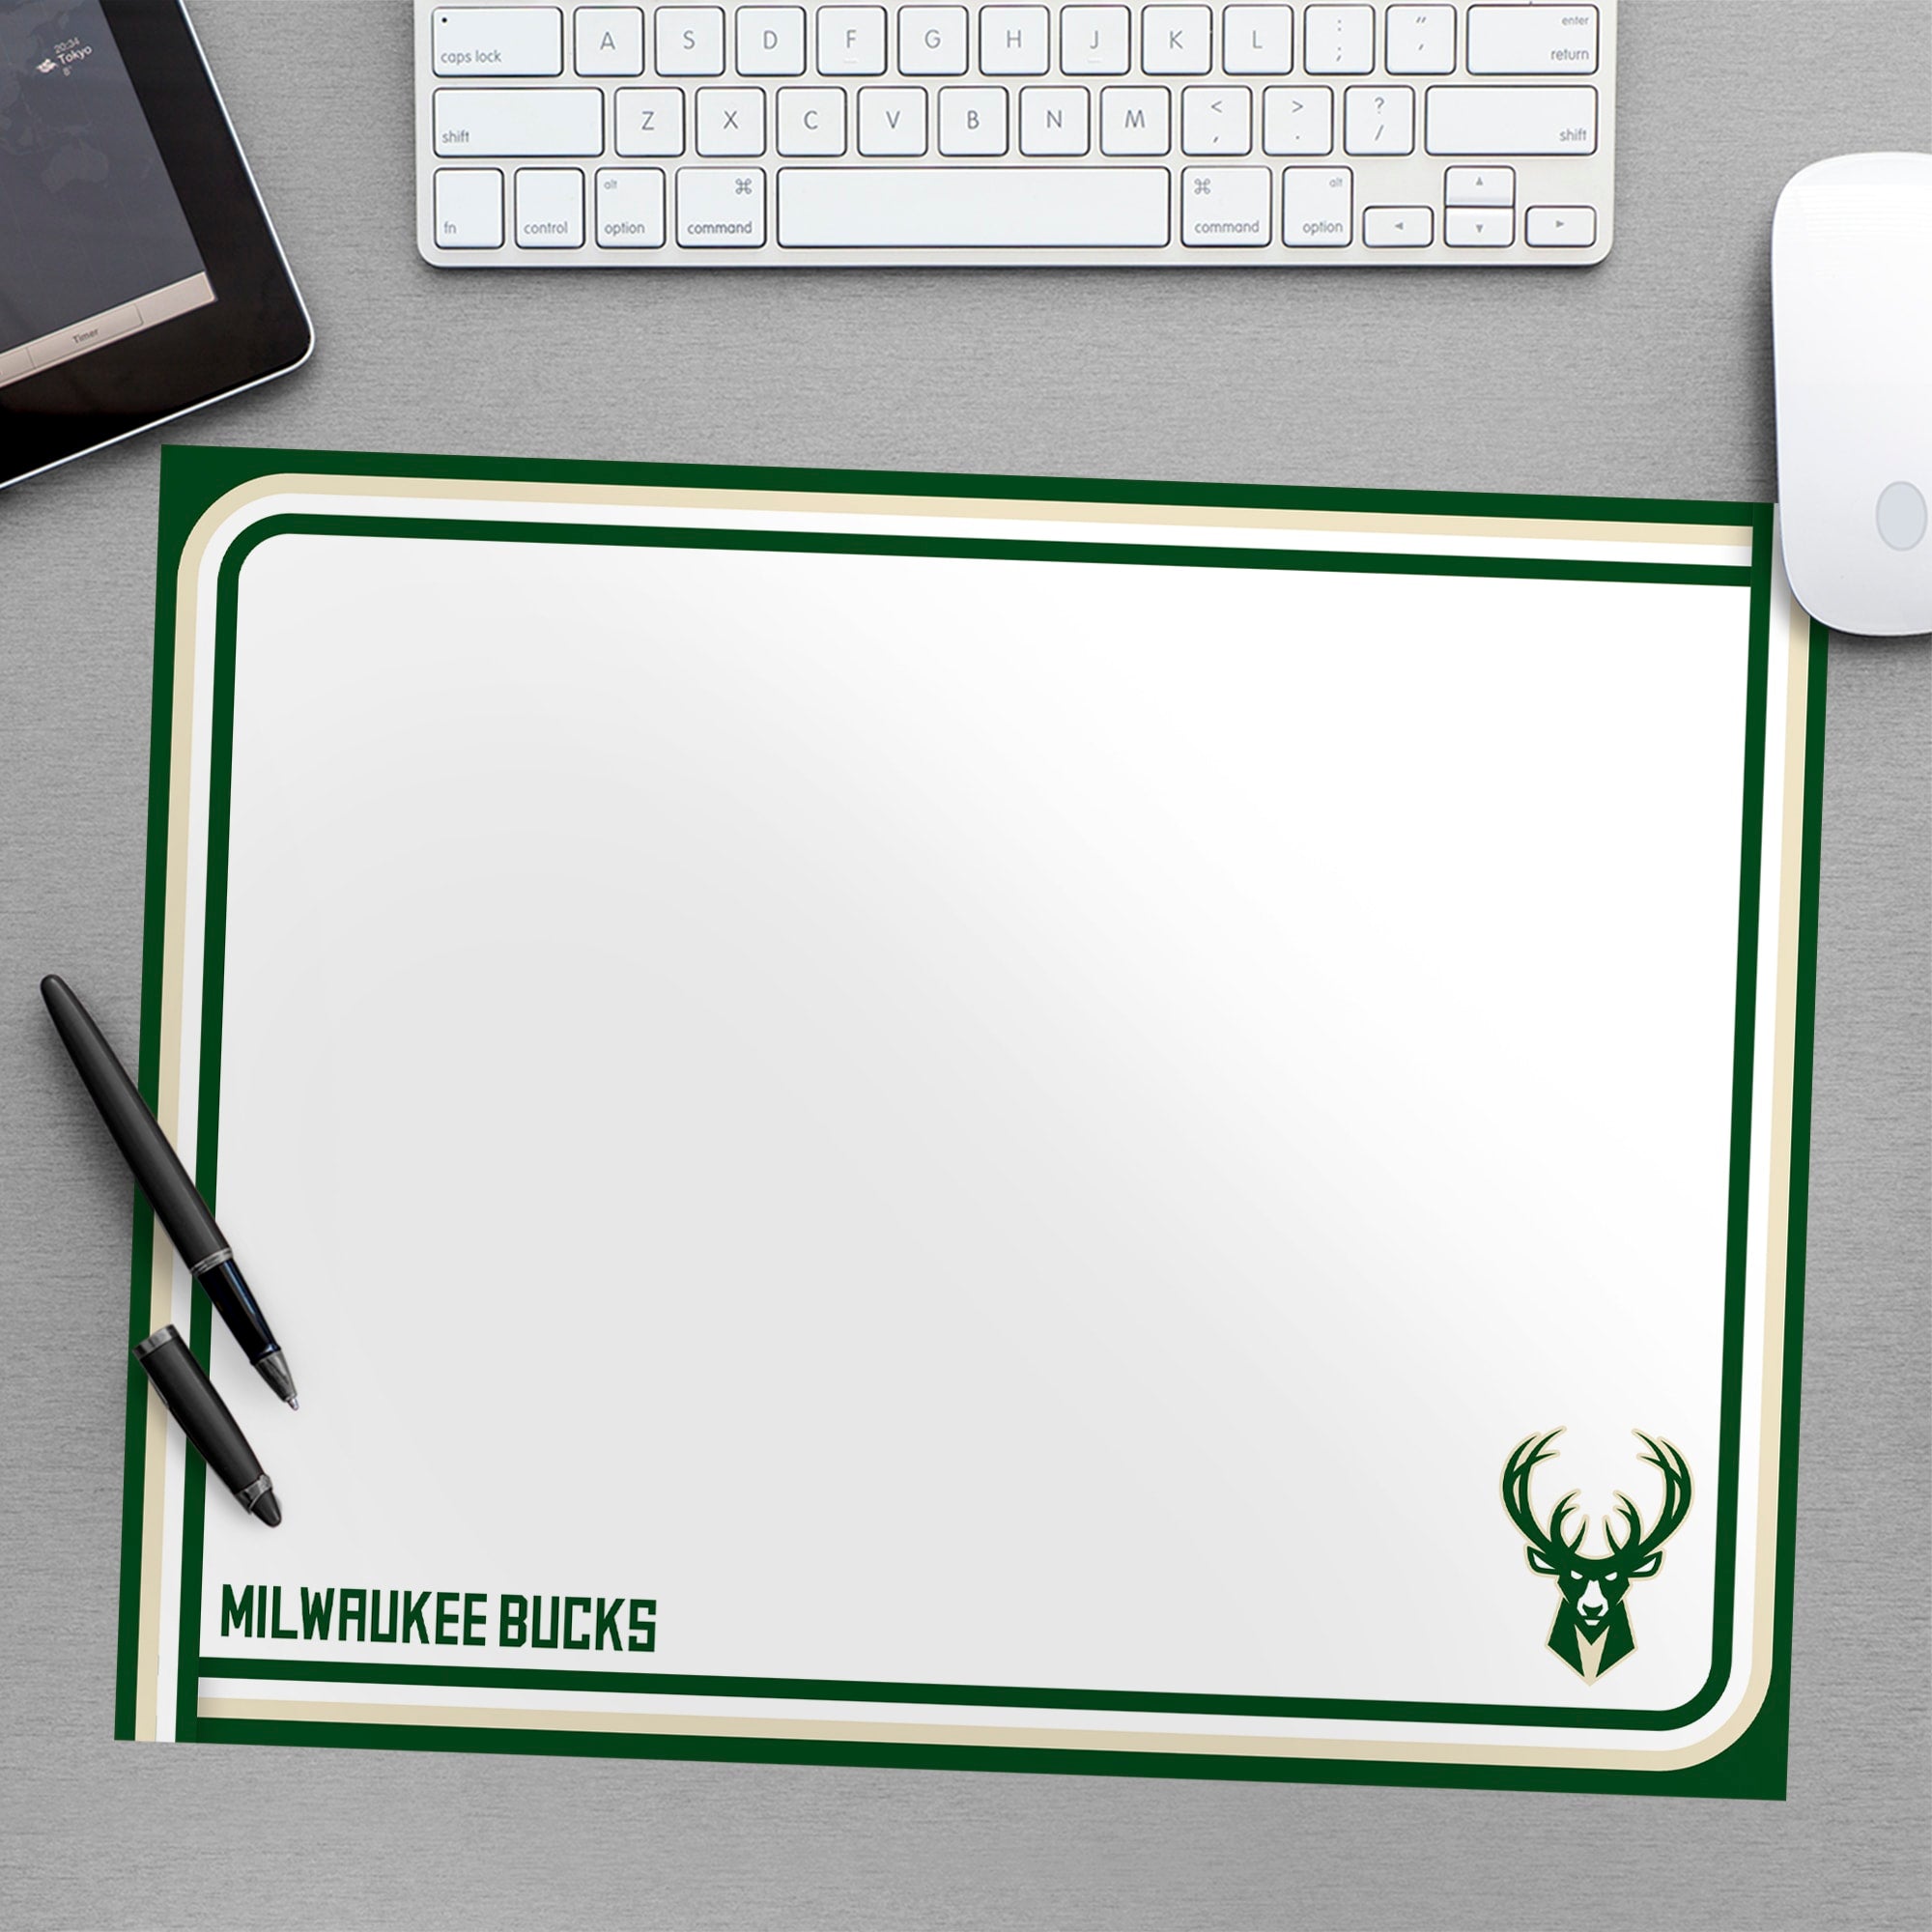 Milwaukee Bucks for Milwaukee Bucks: Dry Erase Whiteboard - Officially Licensed NBA Removable Wall Decal Large by Fathead | Viny